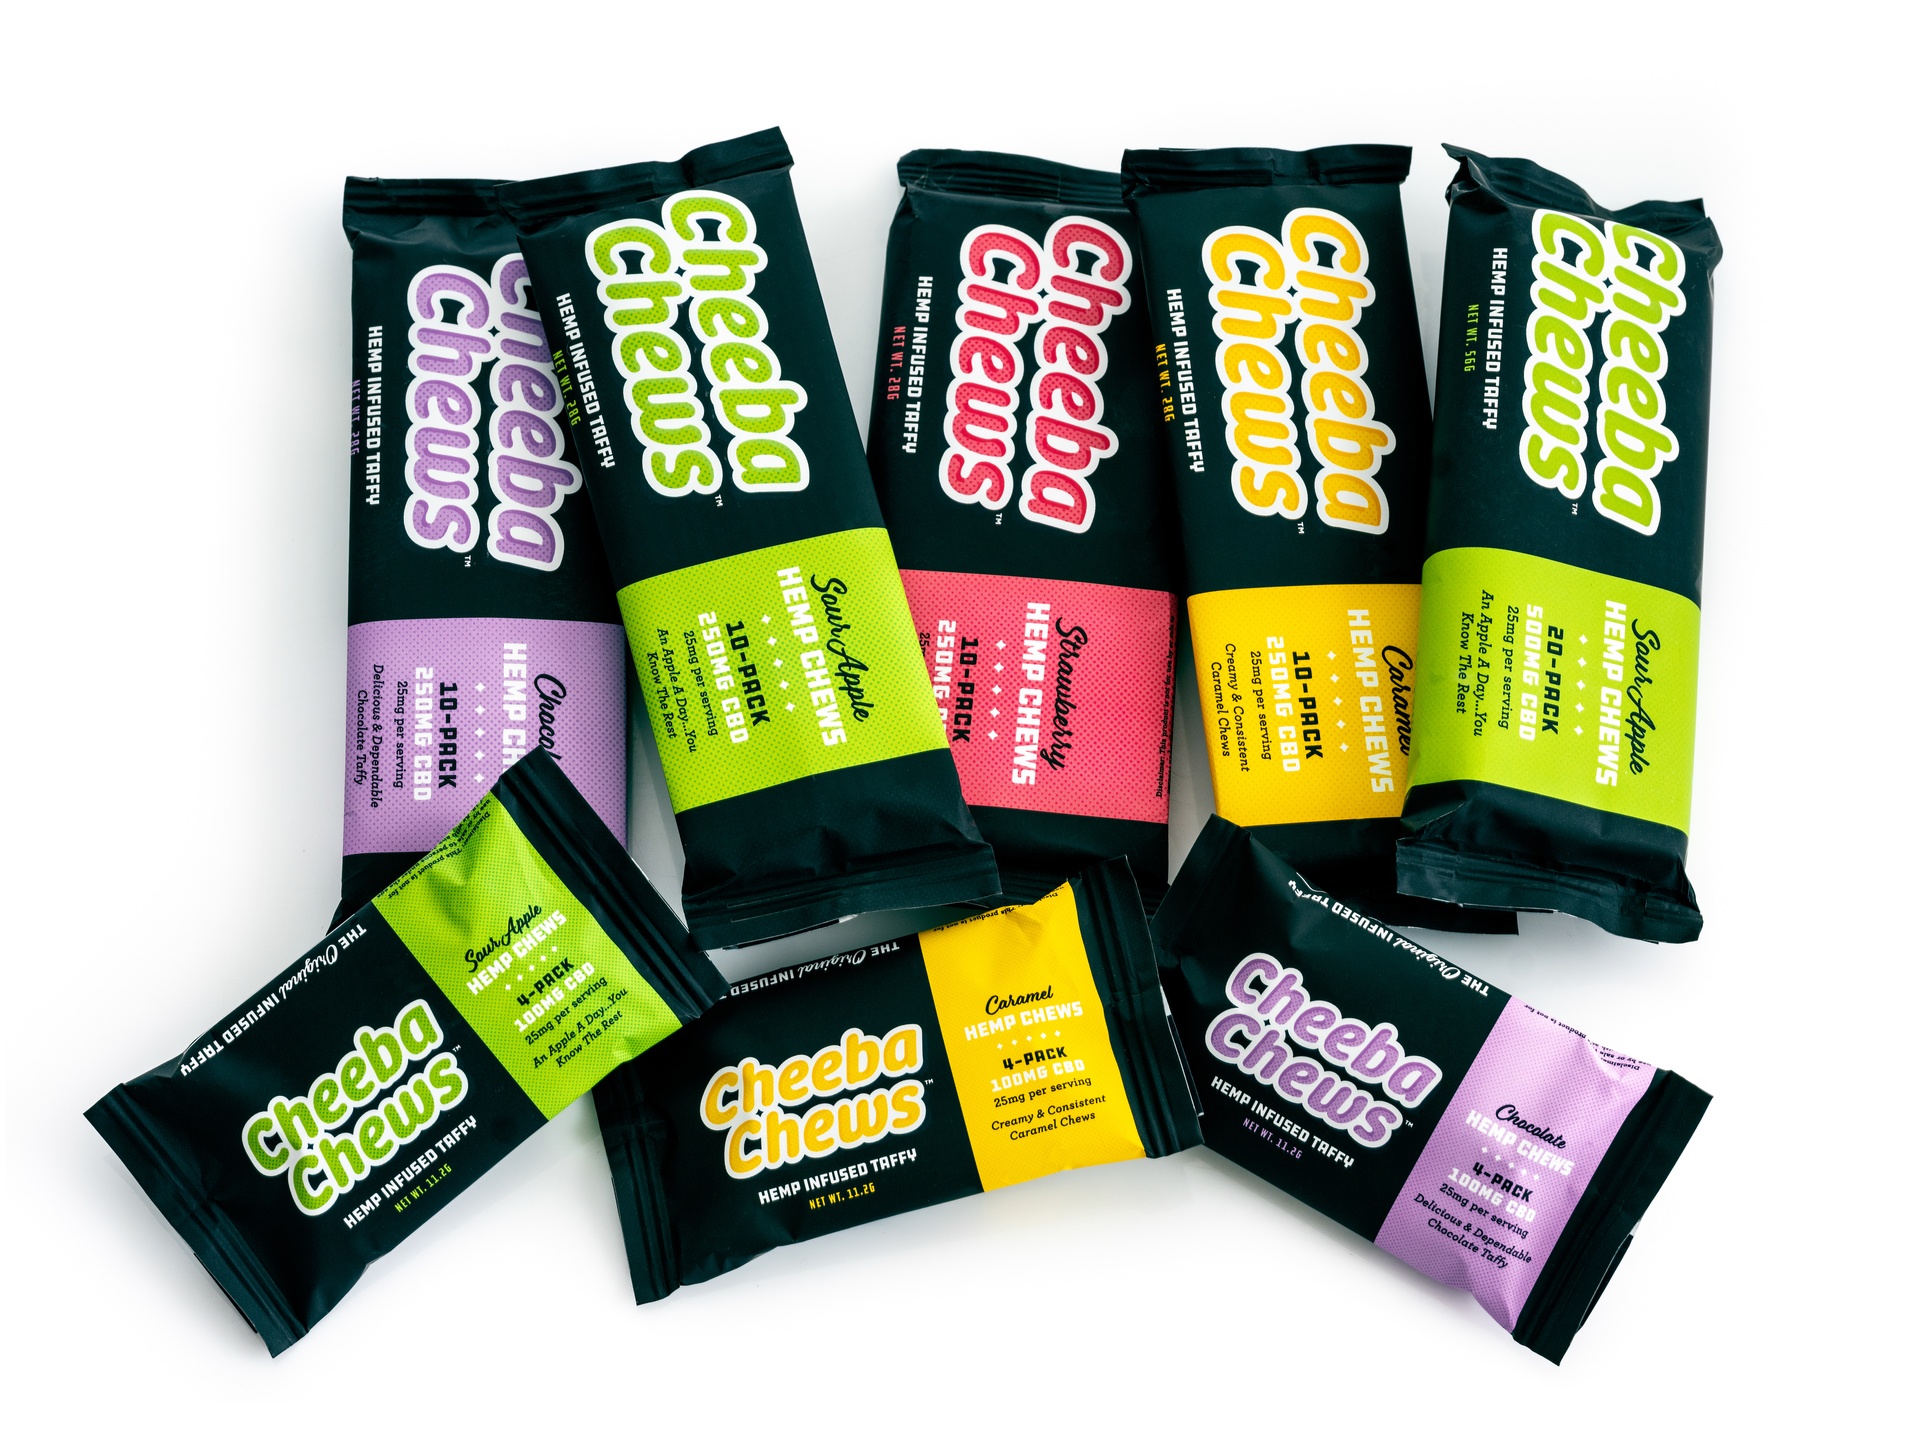 We took a closer look at hemp Cheeba Chews. Cheeba Chews, long time makers of THC candy, are now branching out into CBD chews too.